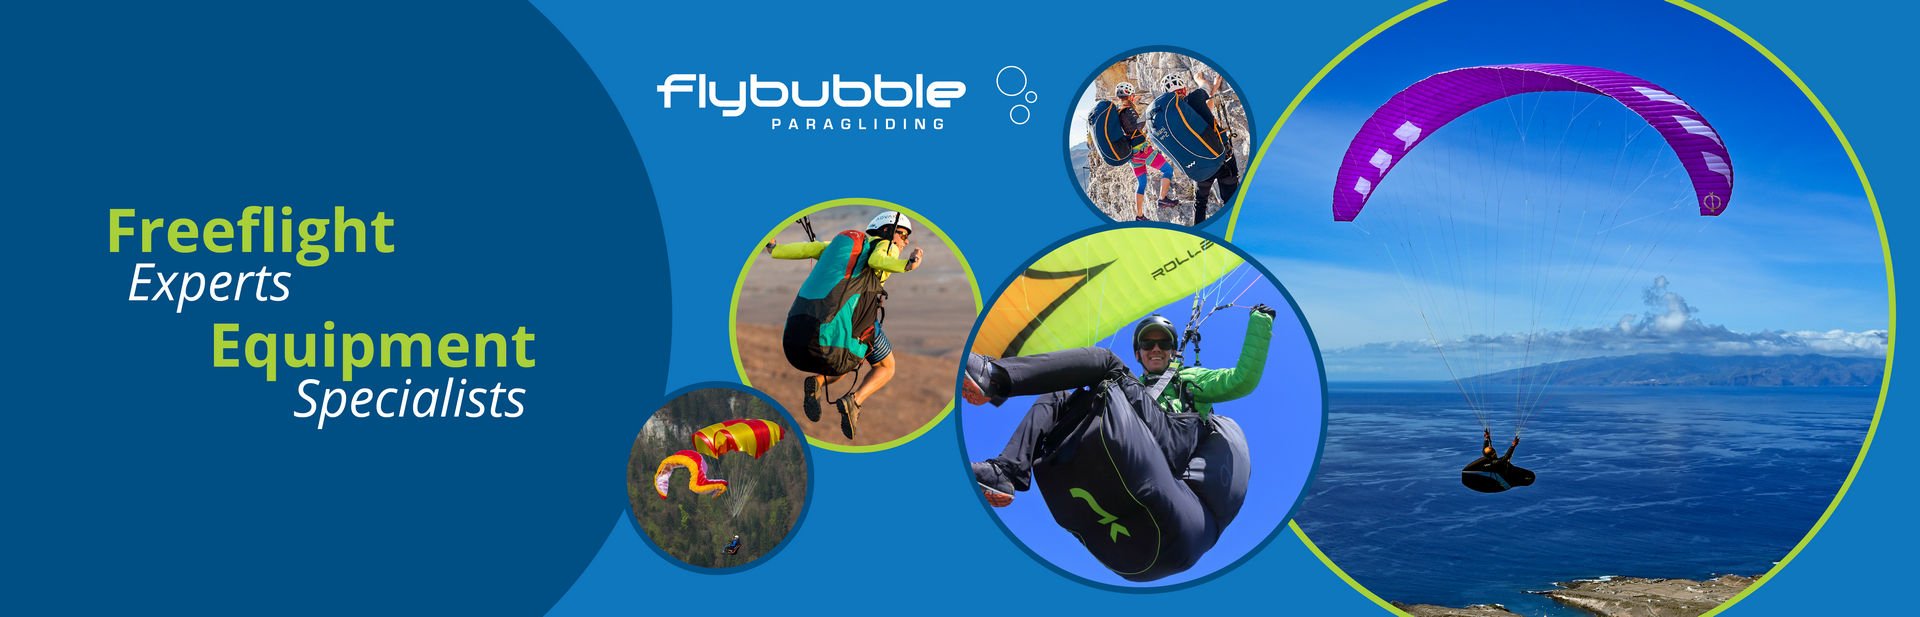 Flybubble — freeflight experts, equipment specialists